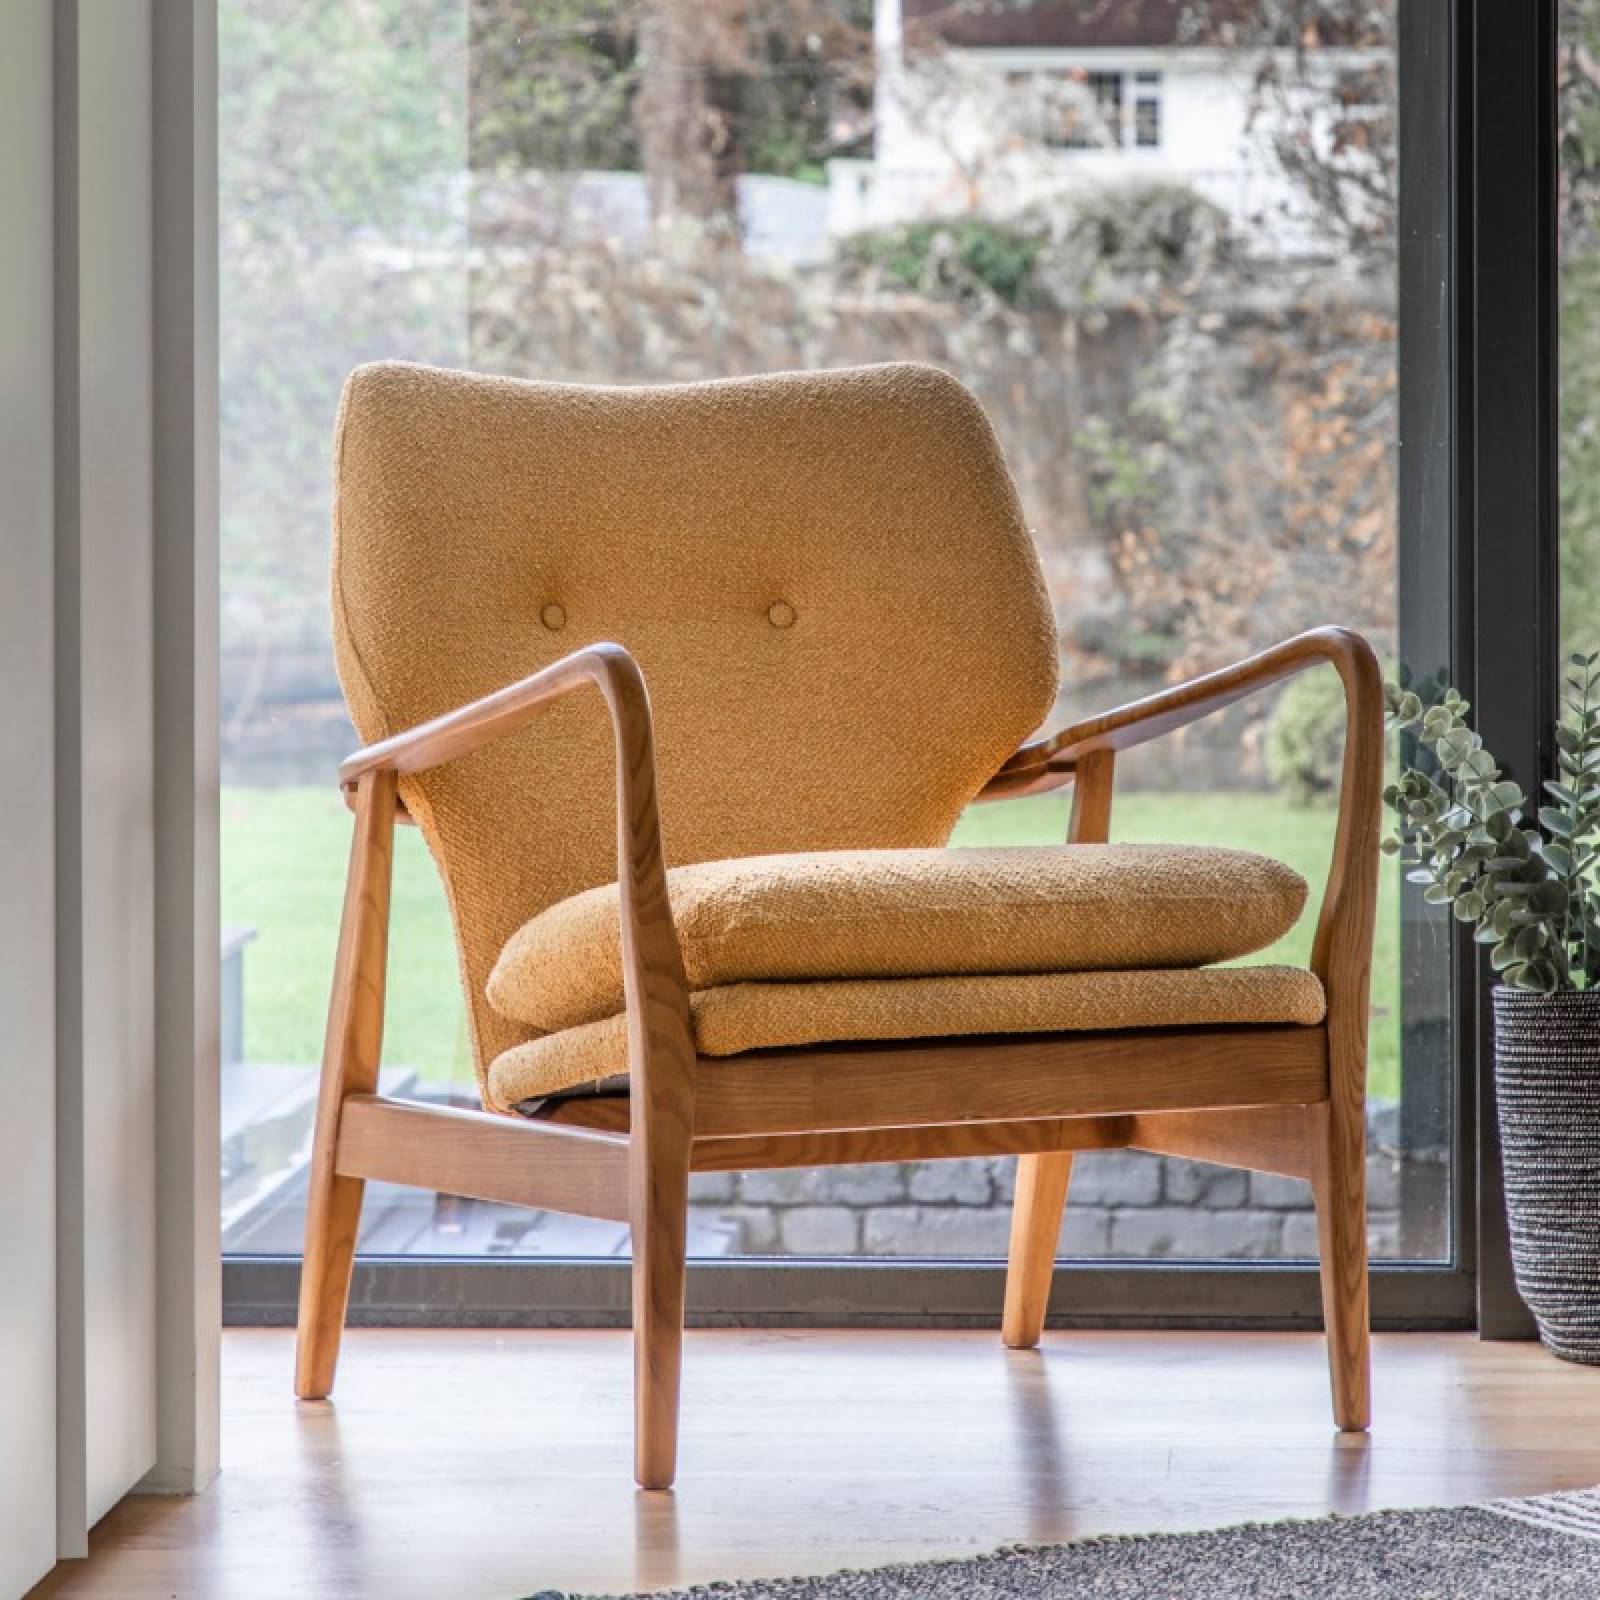 The Button Armchair in Ochre Fabric thumbnails